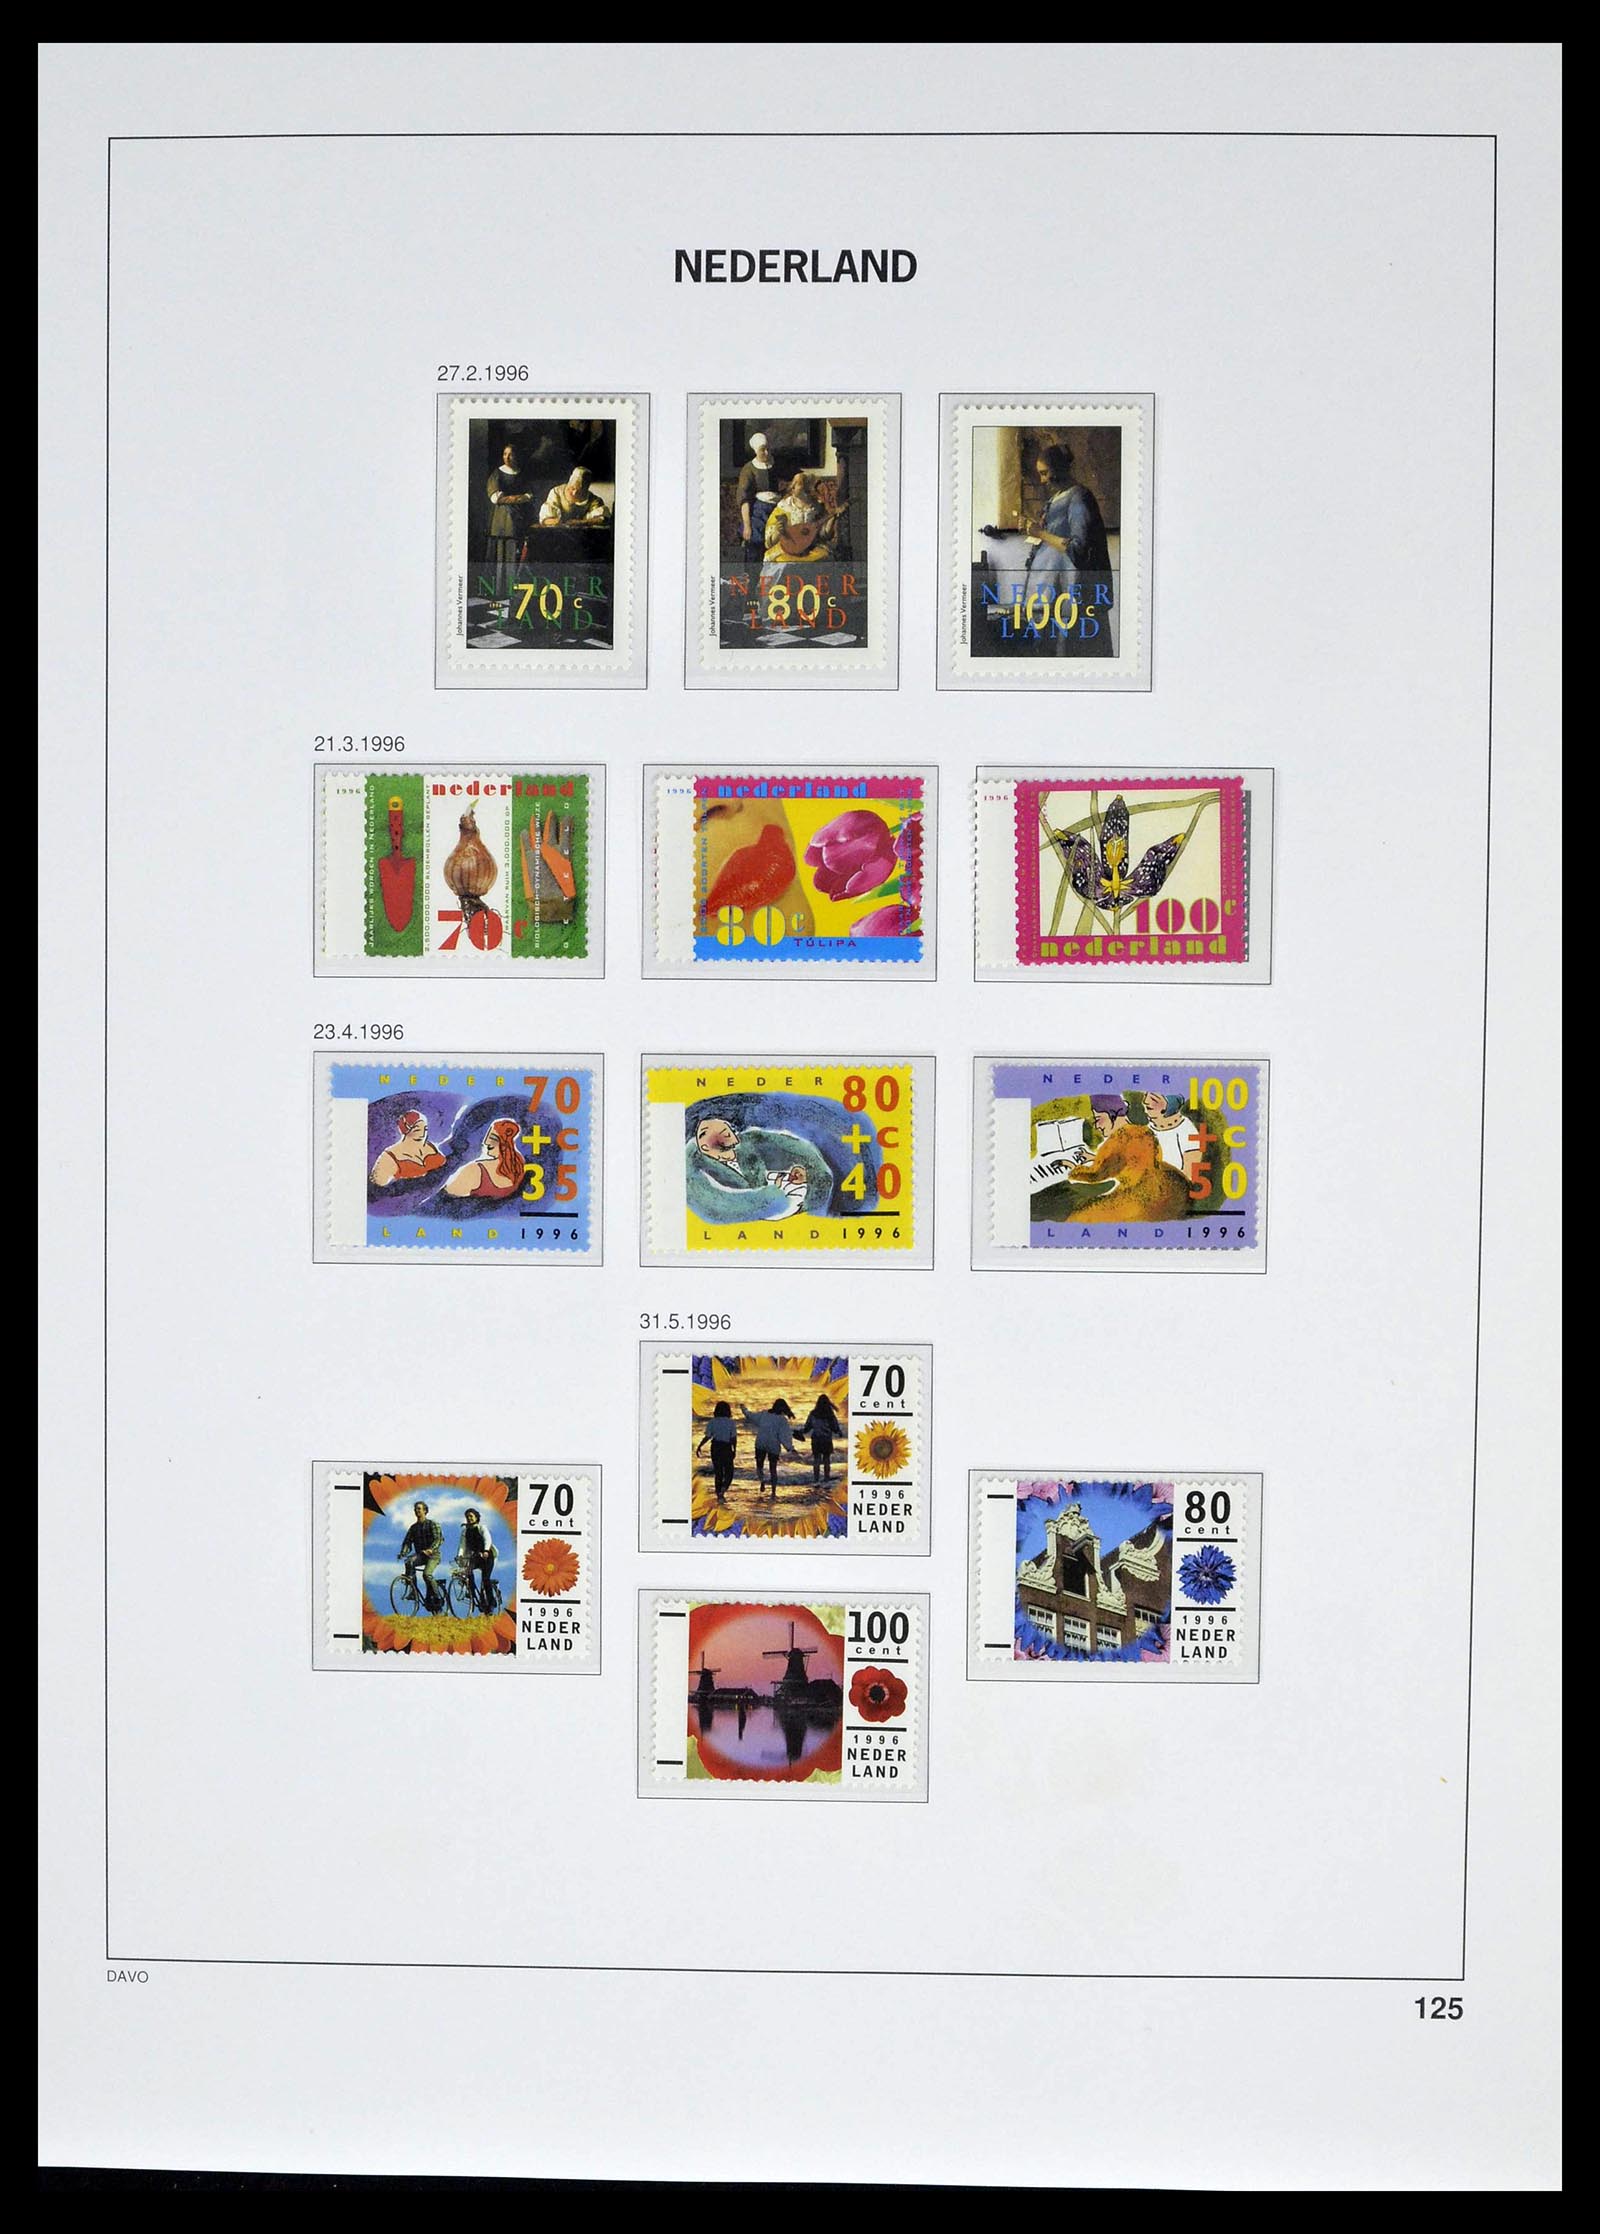 39136 0081 - Stamp collection 39136 Netherlands 1975-2020!